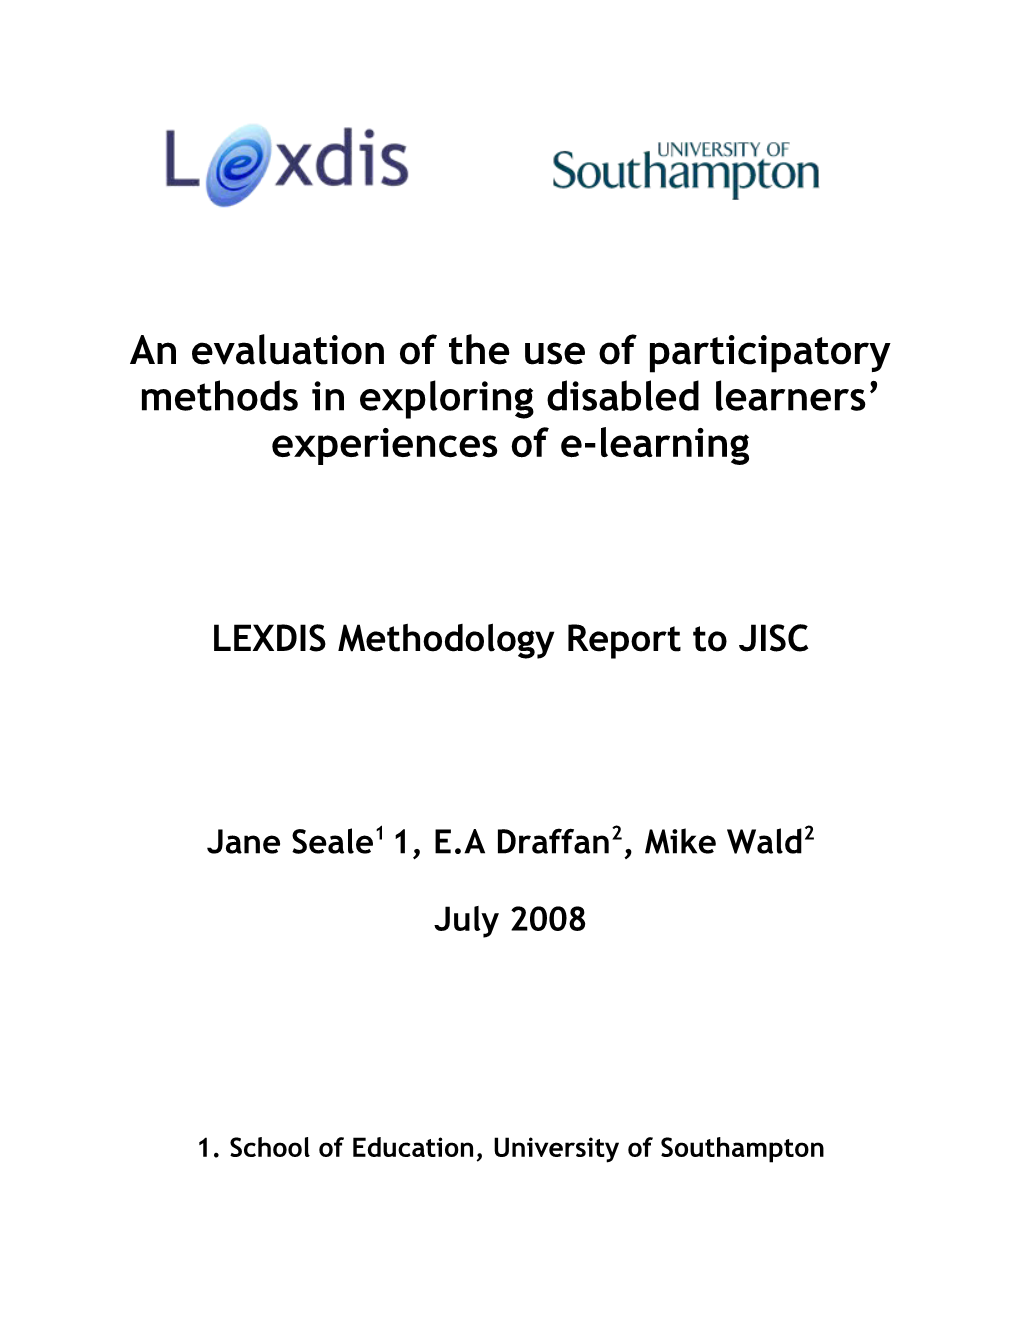 LEXDIS Methodology Report- Proposed Outline